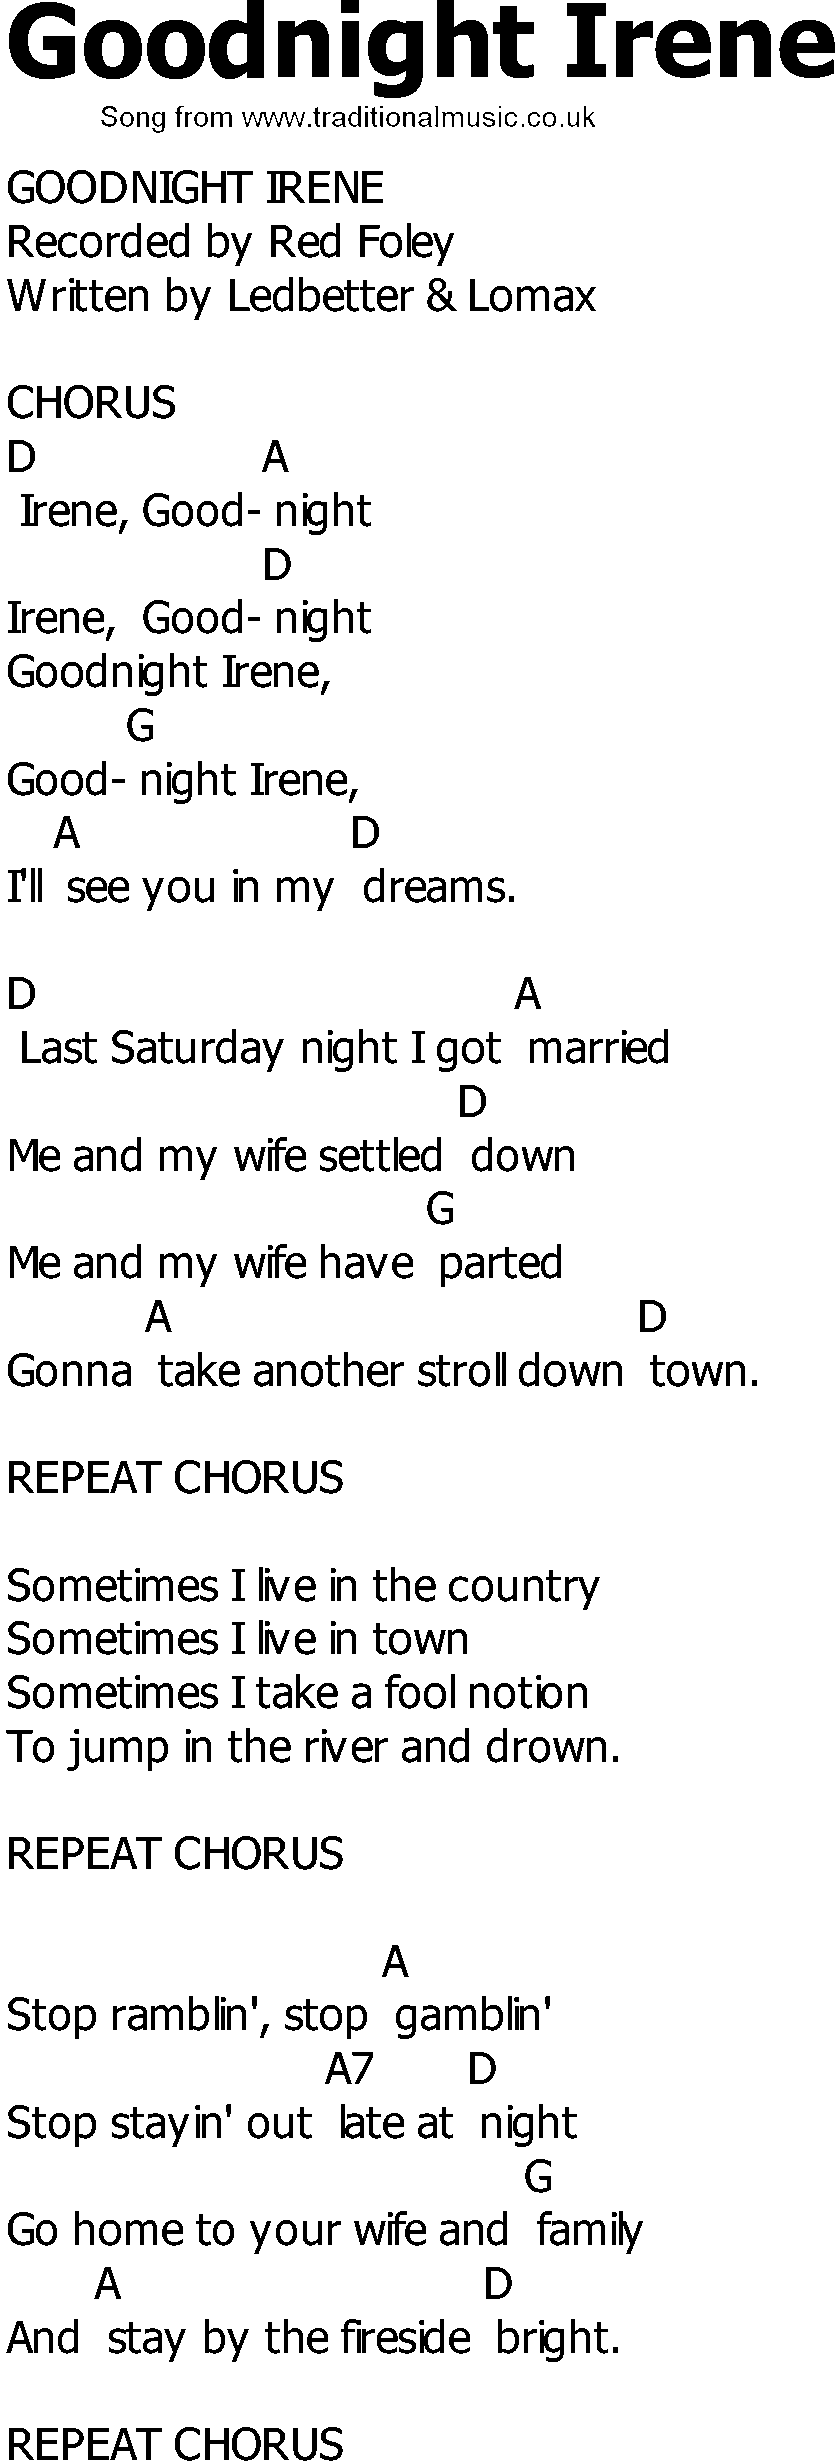 Old Country song lyrics with chords - Goodnight Irene